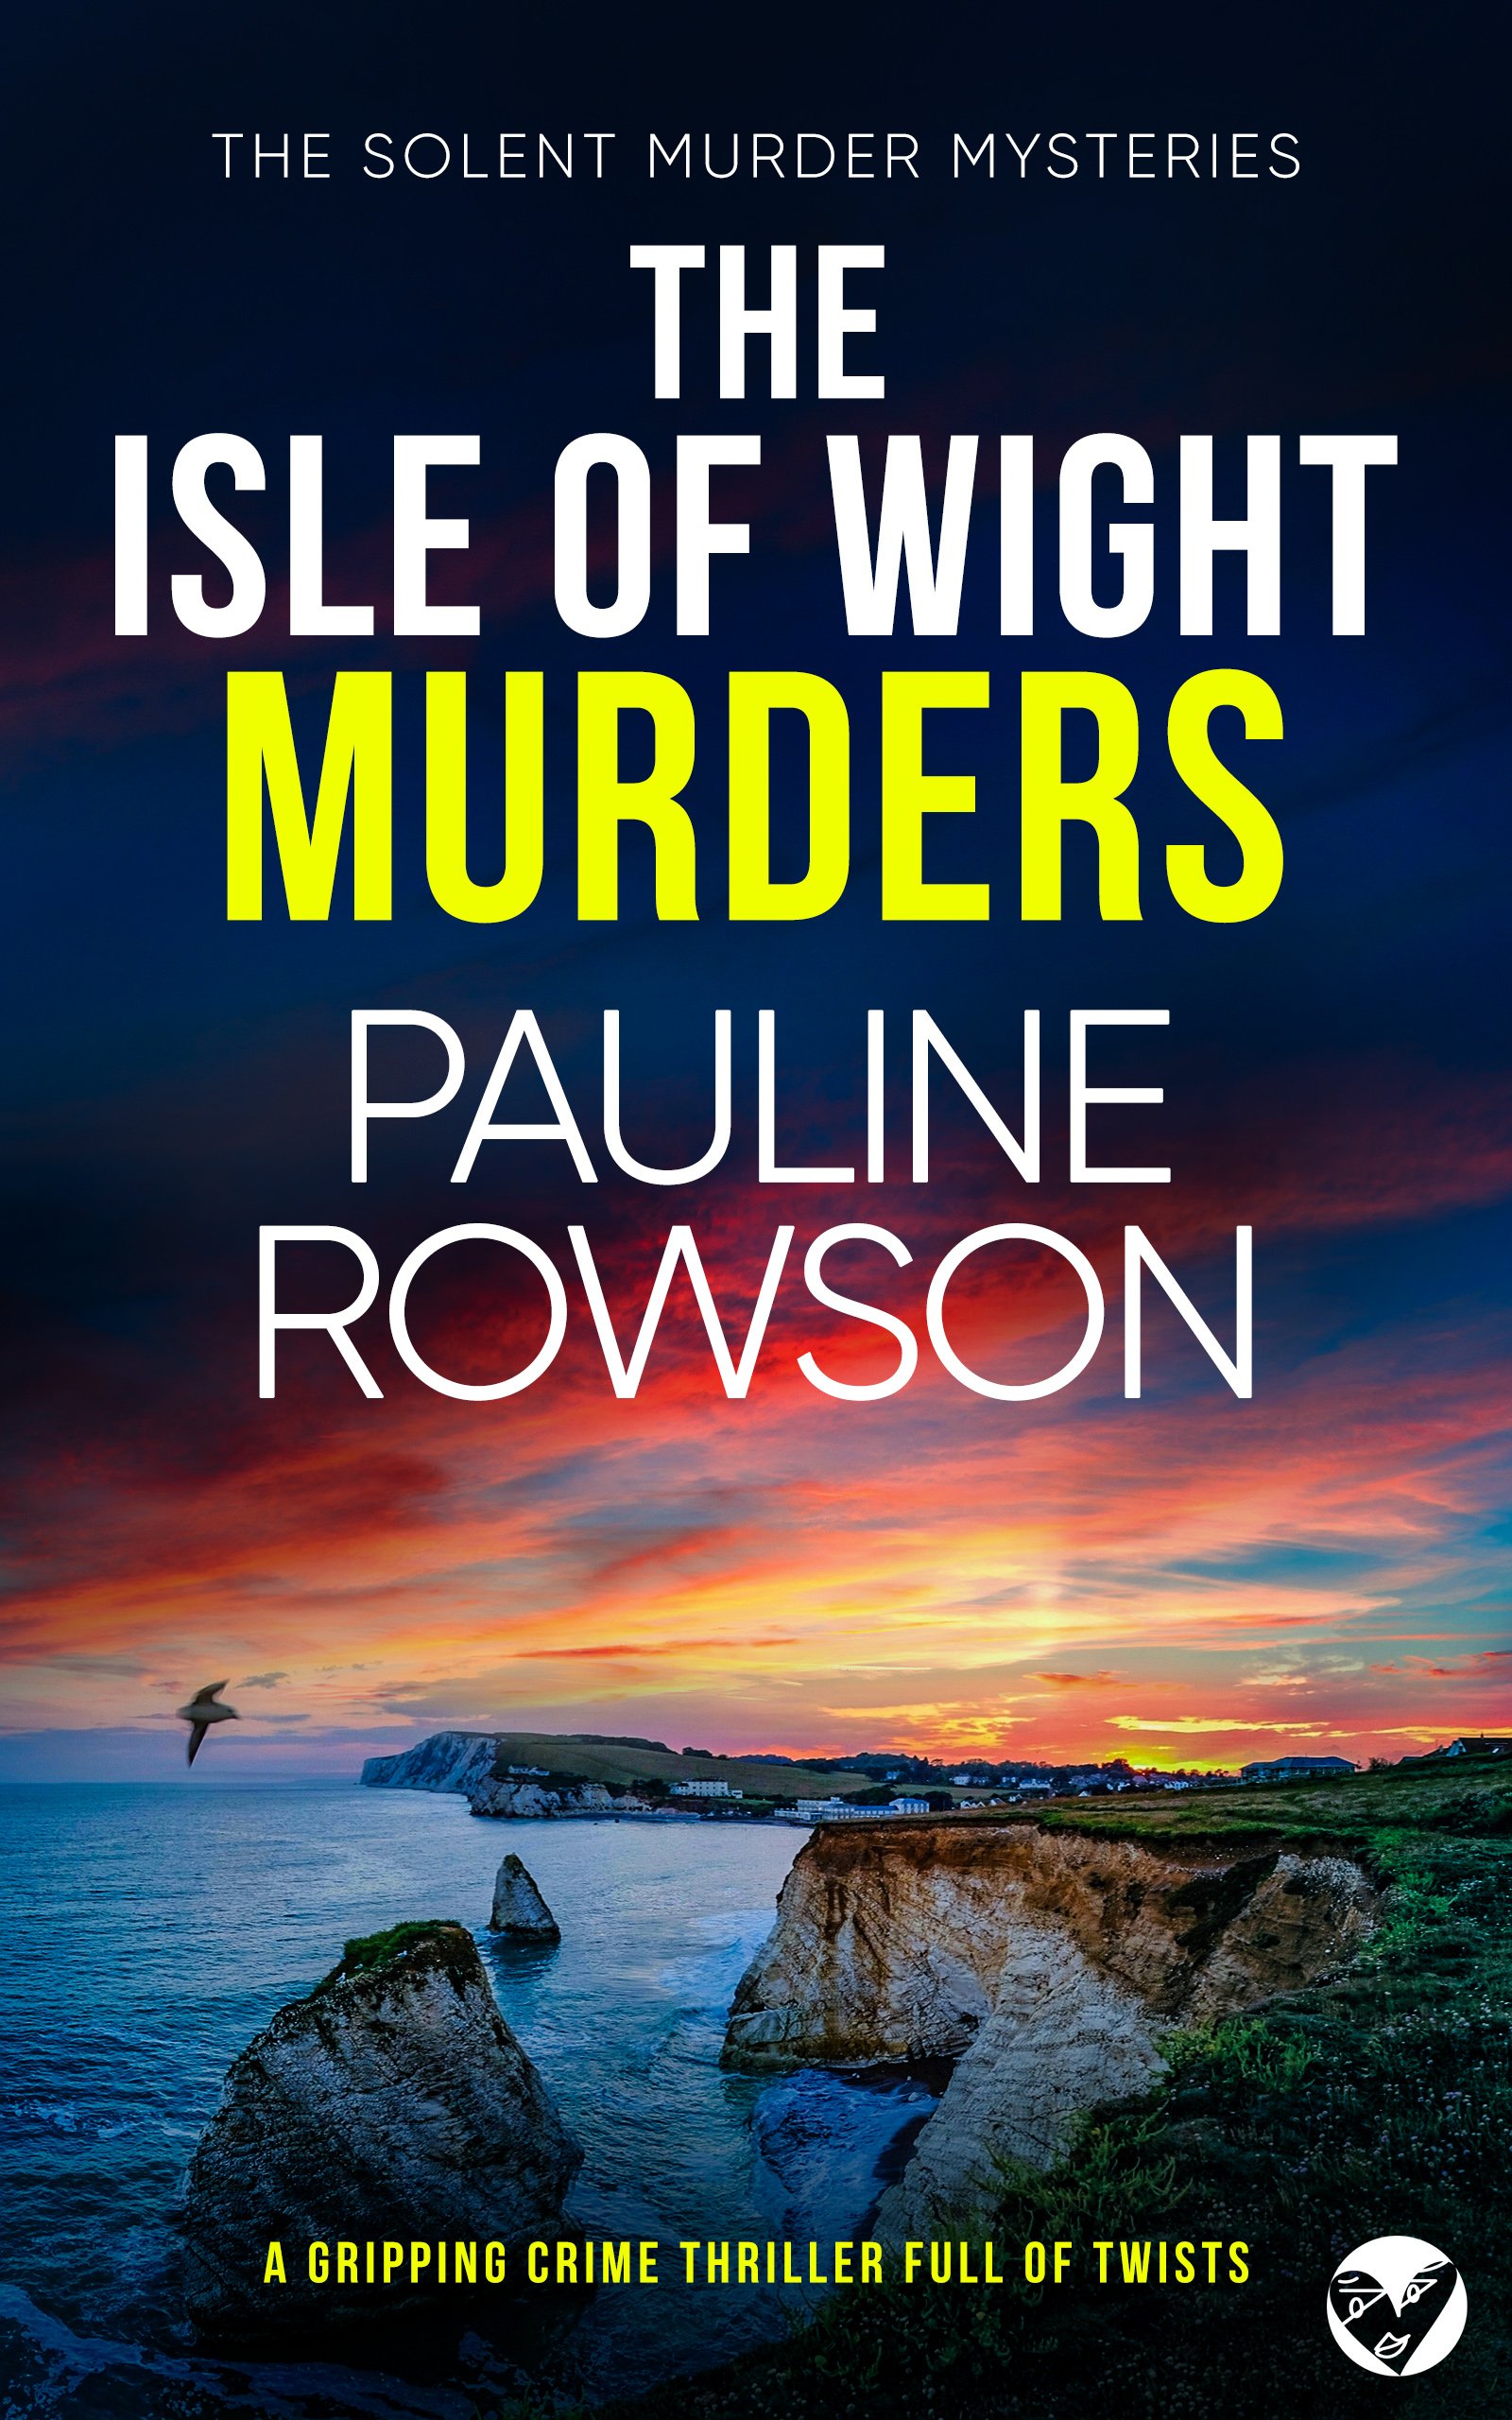 THE ISLE OF WIGHT MURDERS Cover publish.jpg